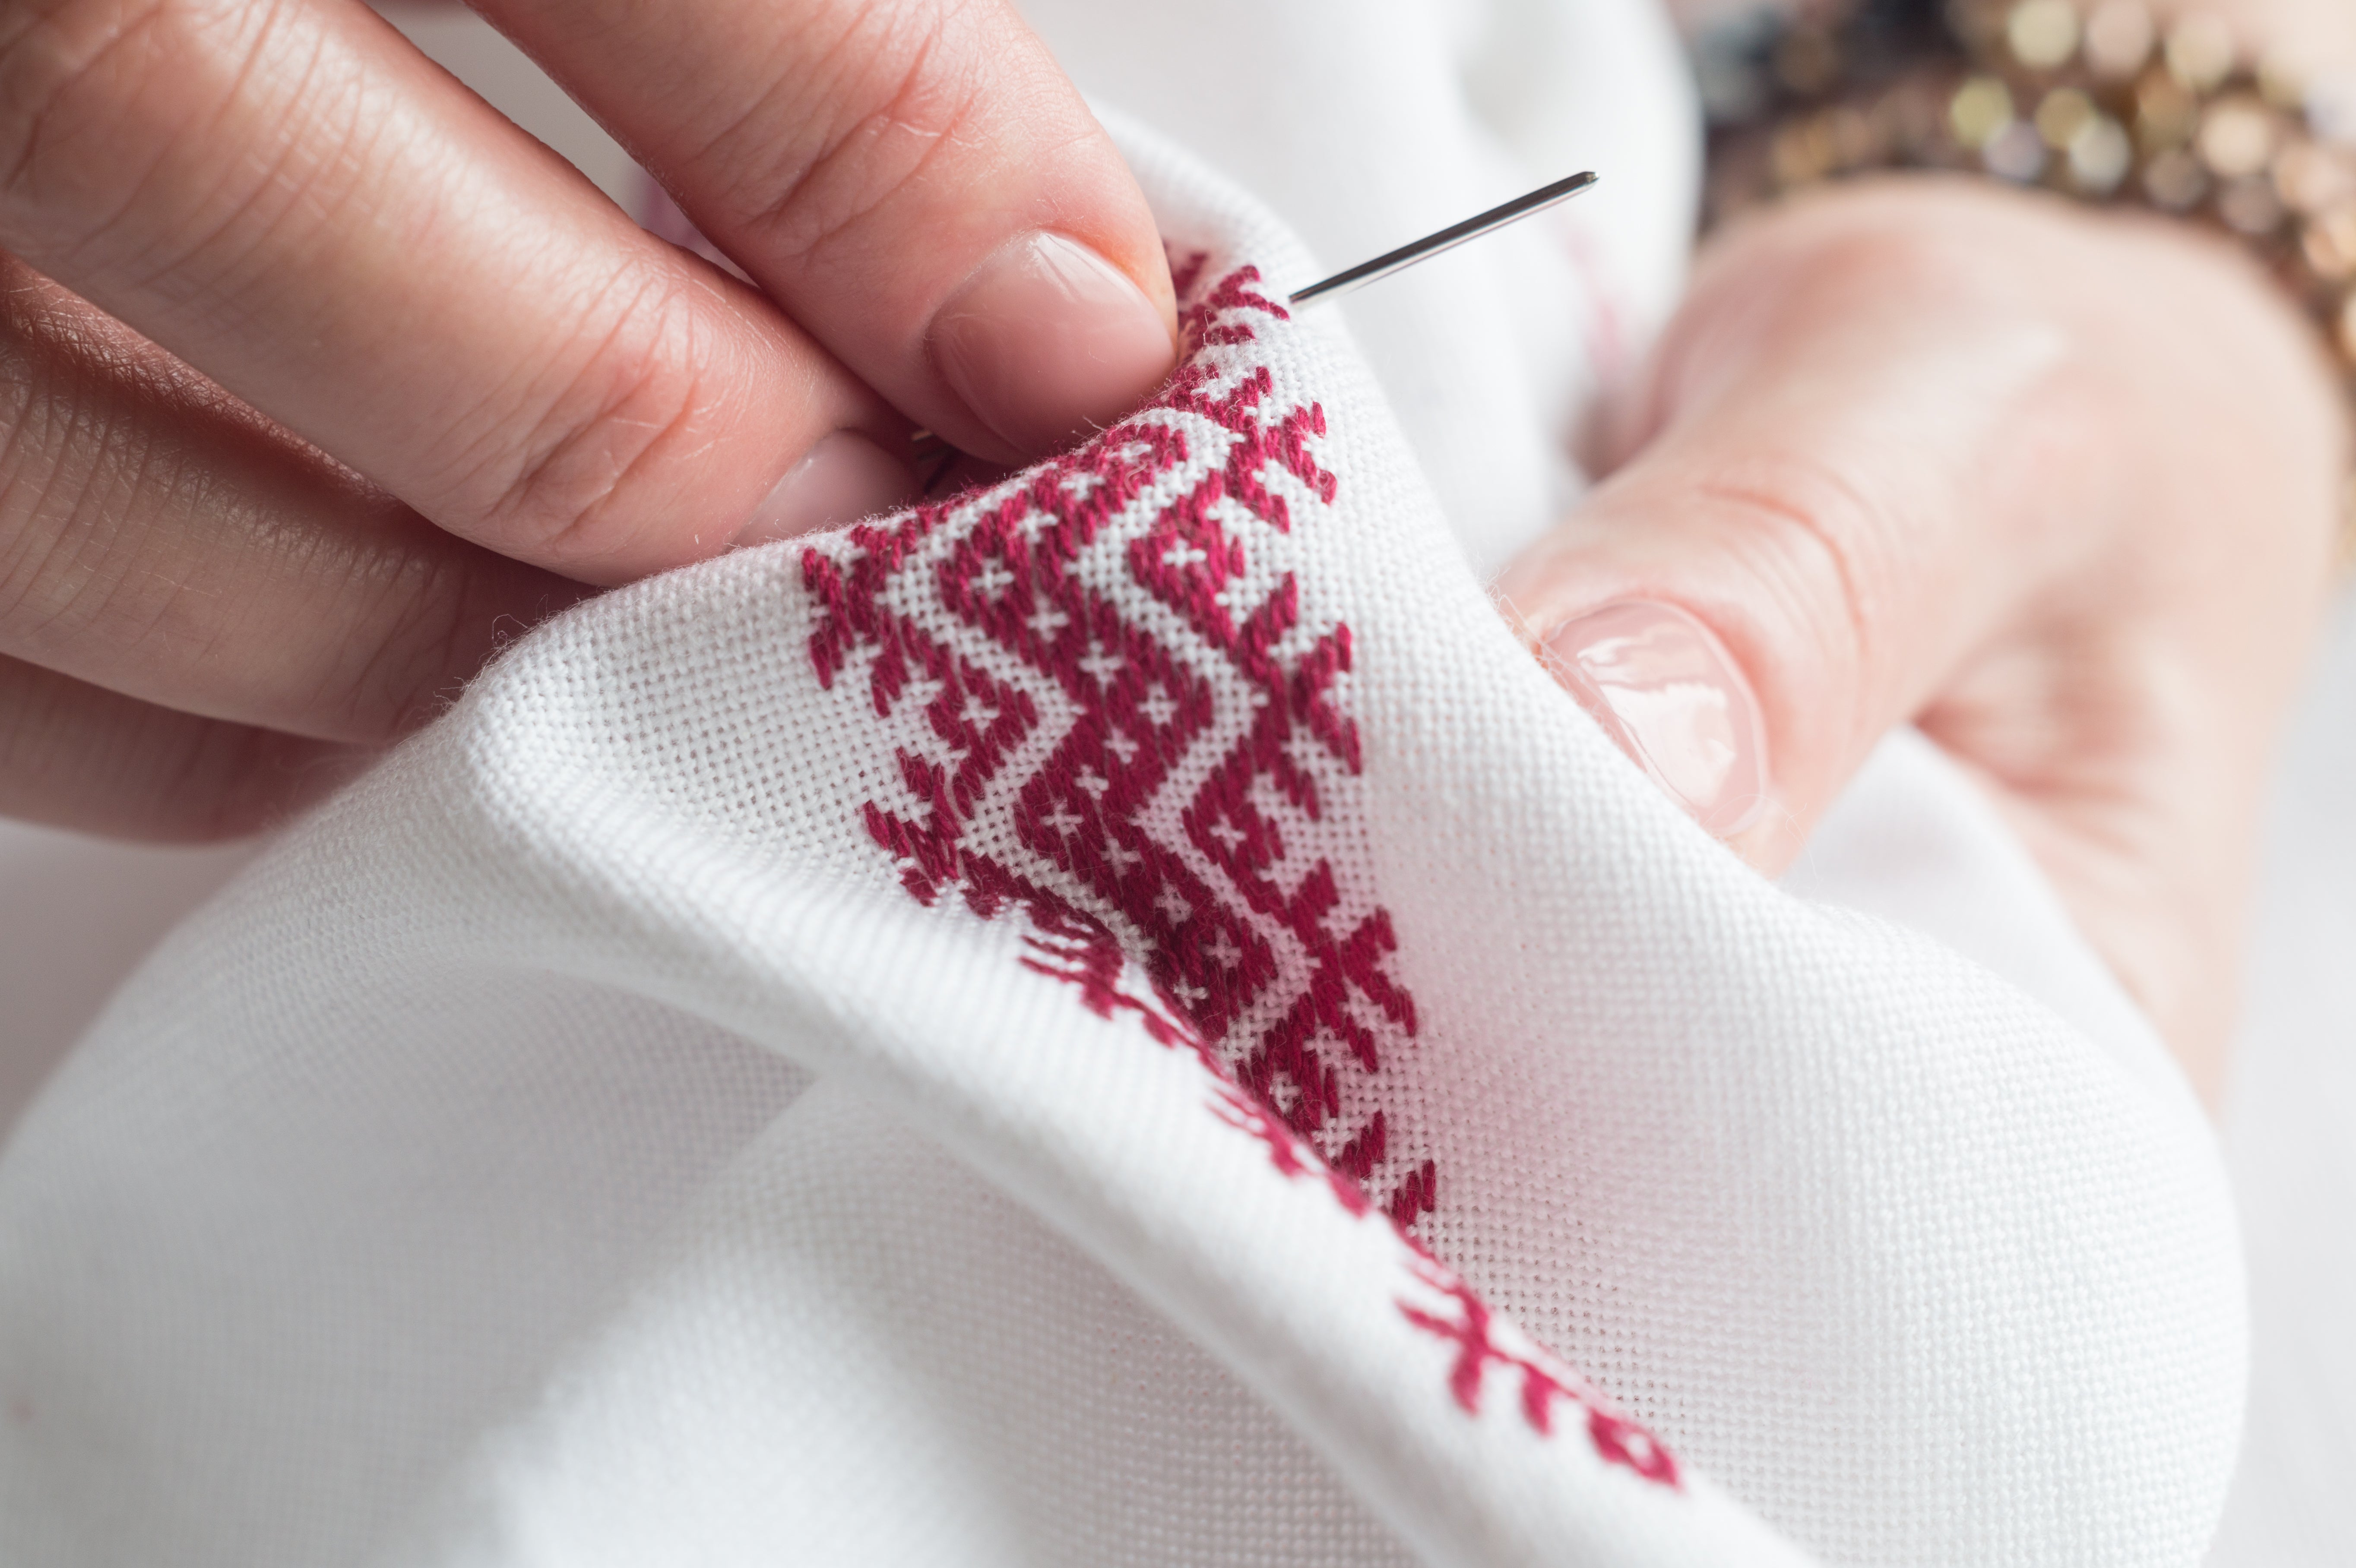 Understanding the Difference between Stamped Cross Stitch and Standard Cross Stitch